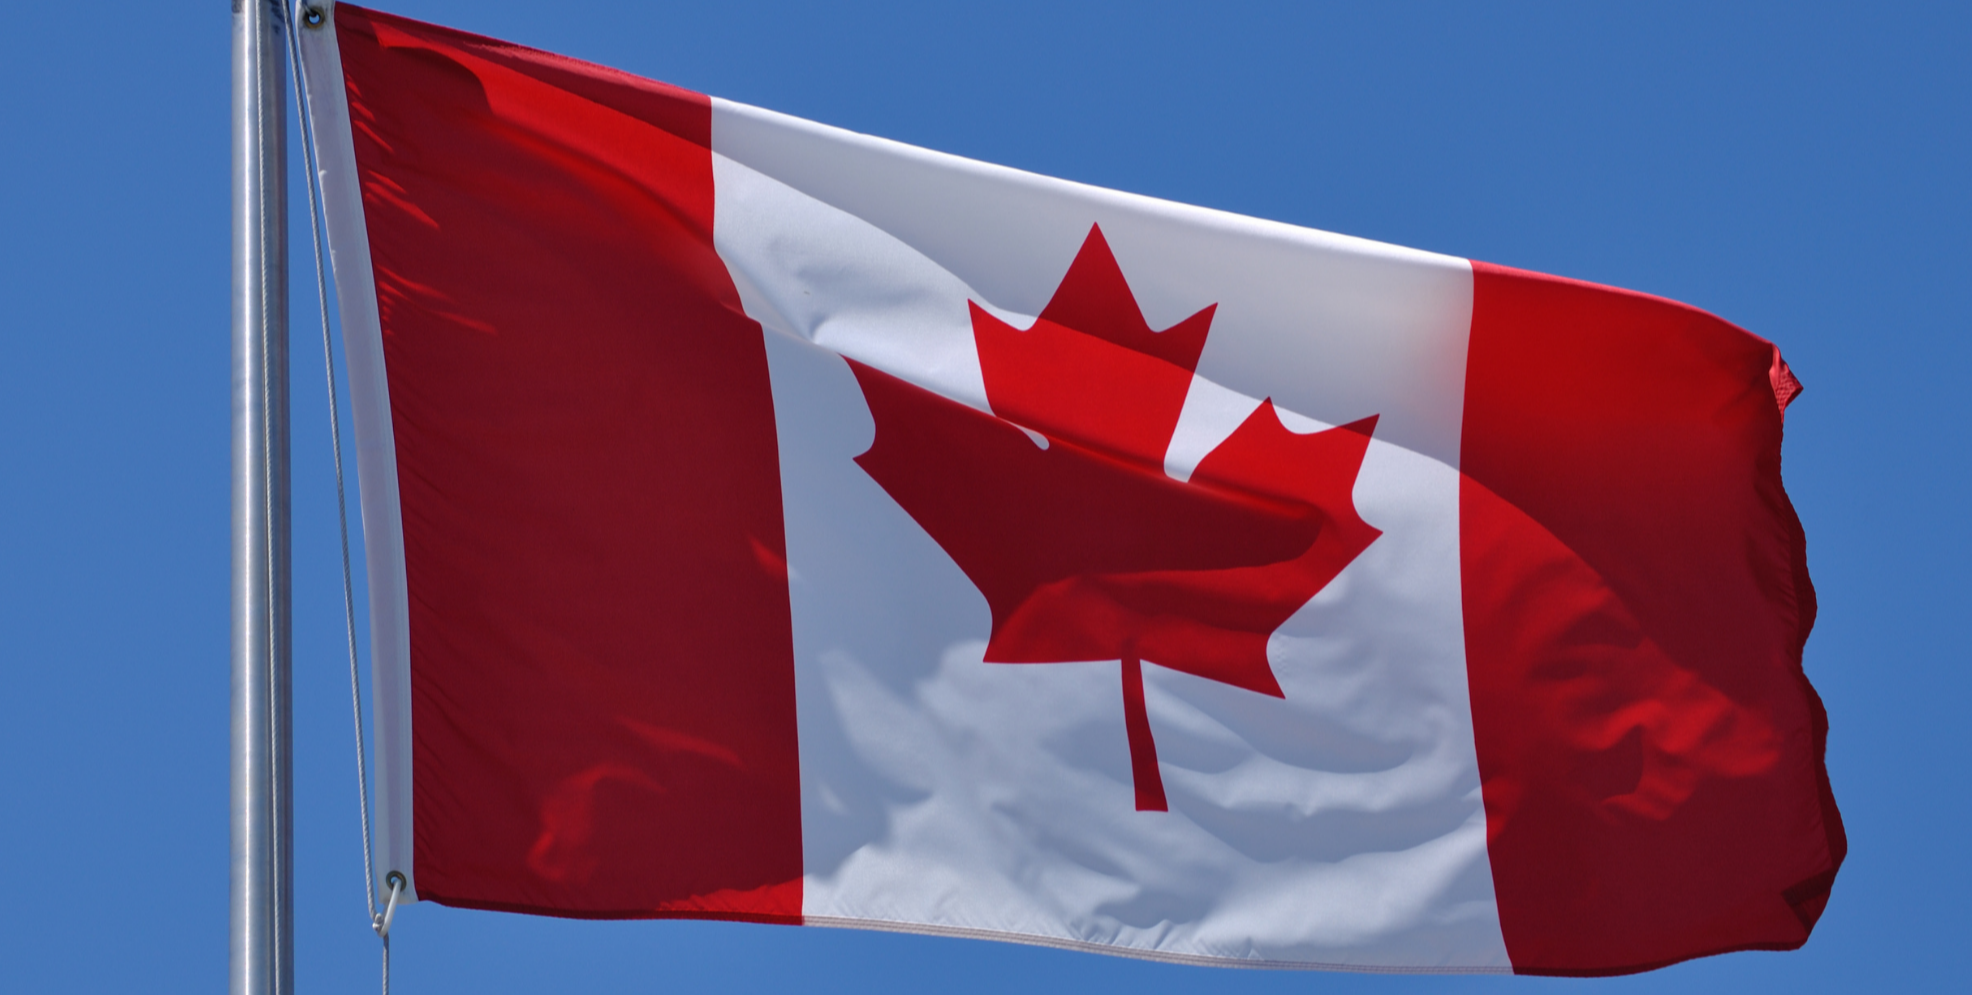 Image of Canadian flag.